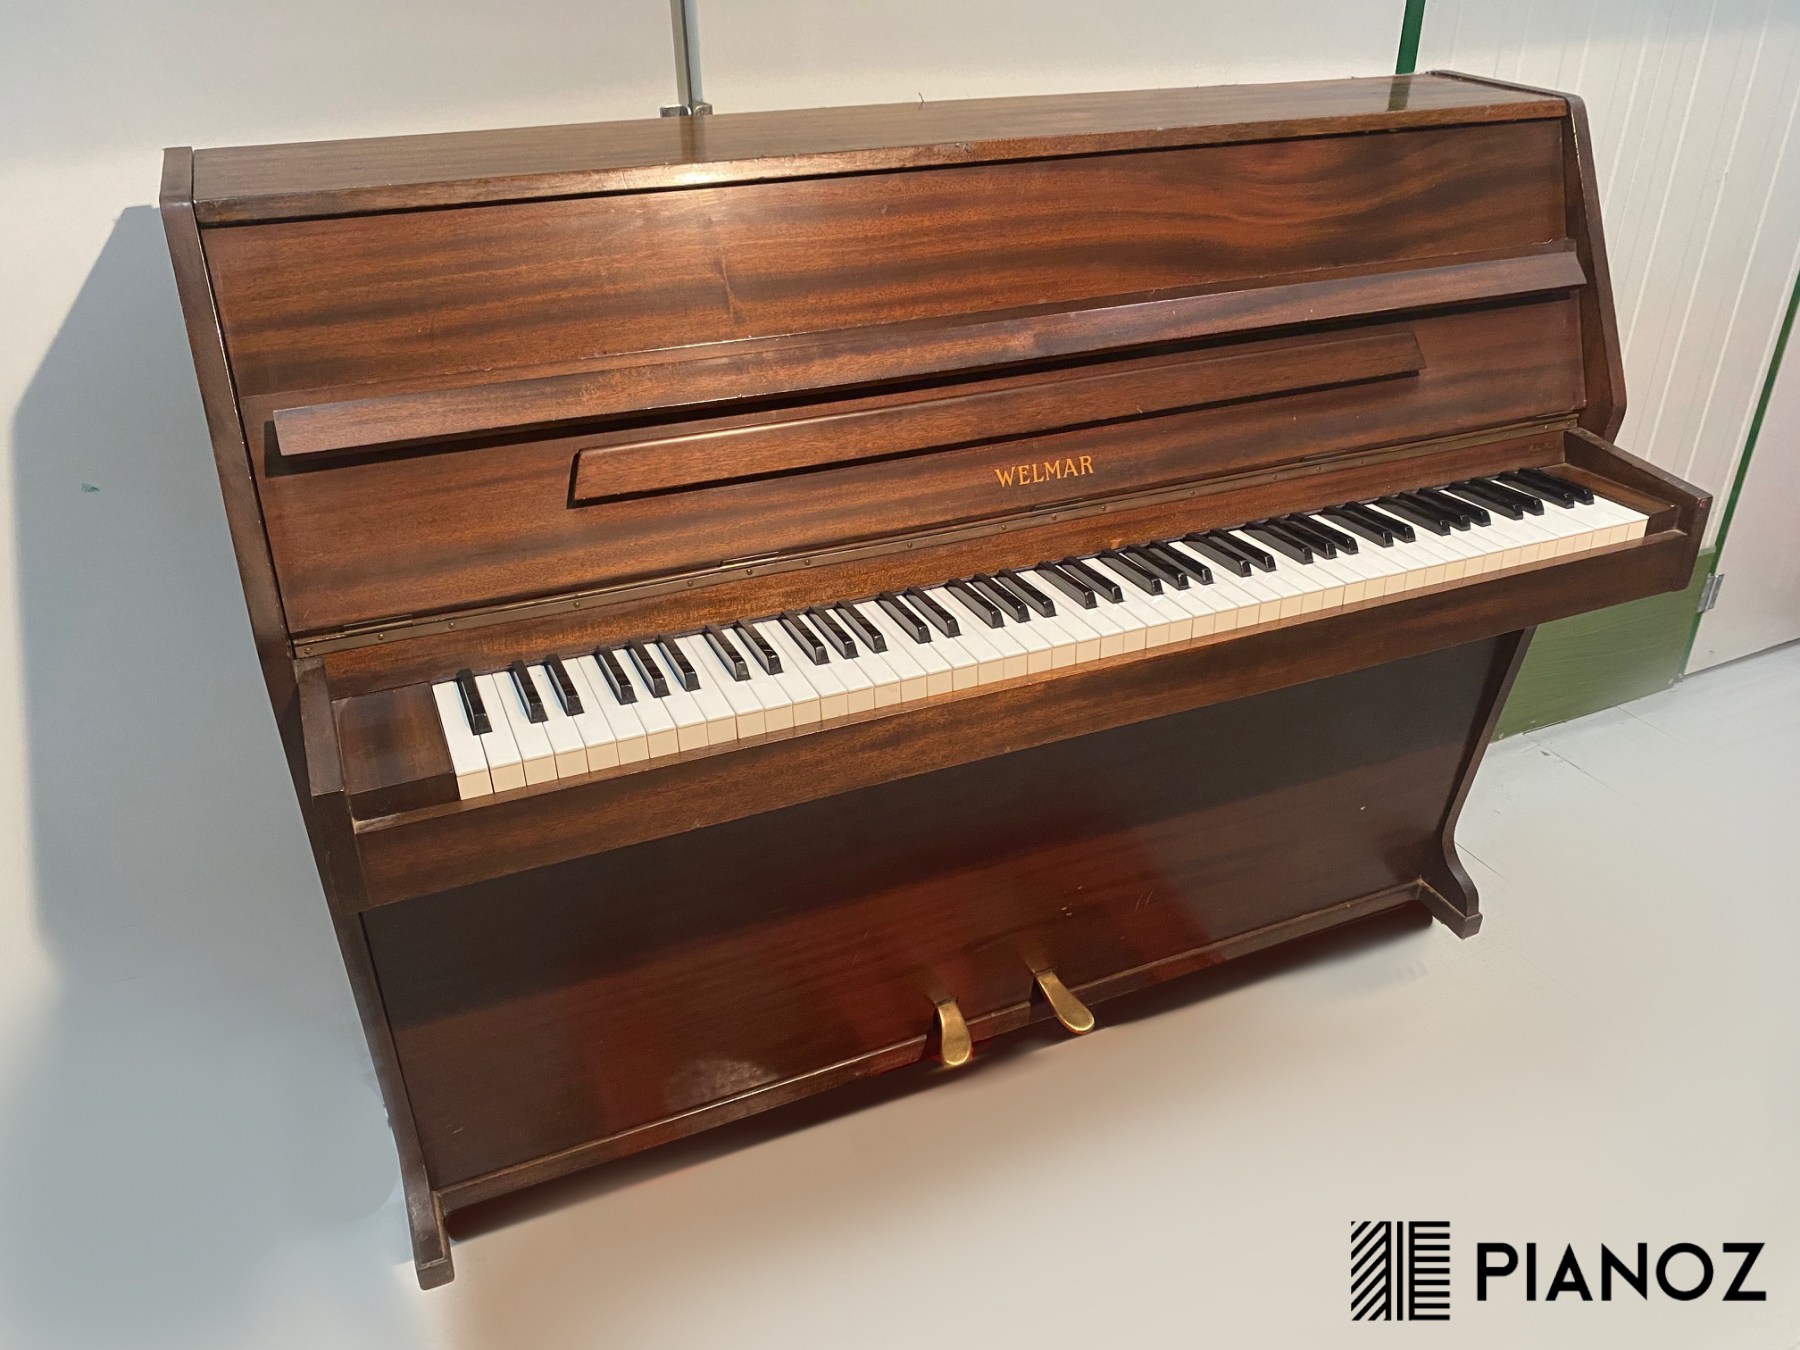 Welmar Compact Upright Piano piano for sale in UK